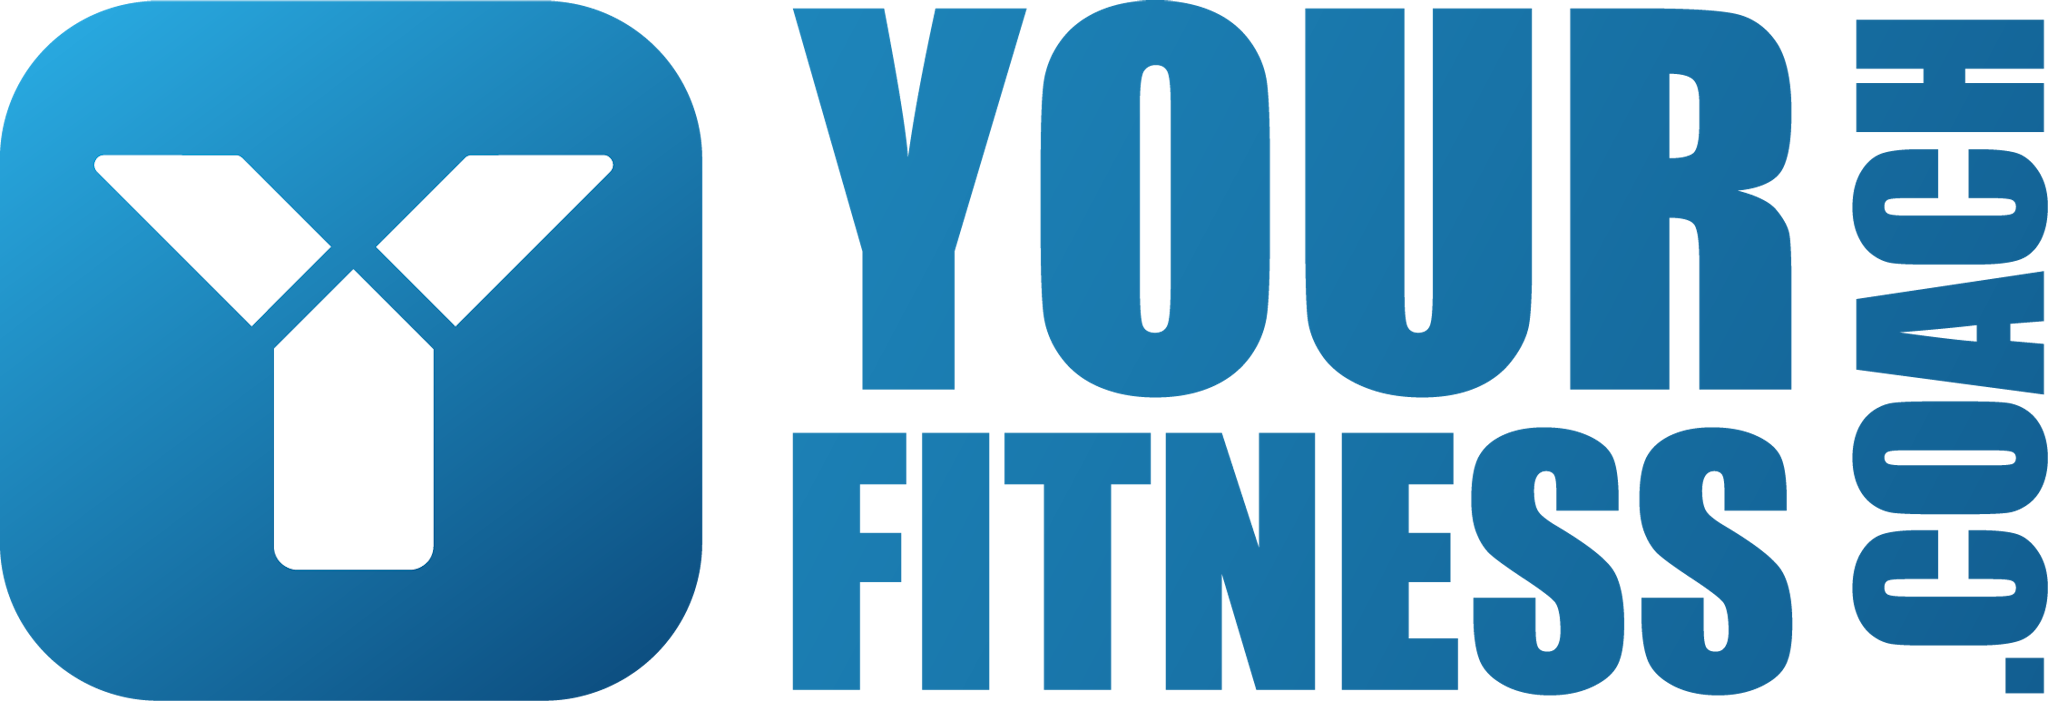 Your Fitness Coach Brand Logo